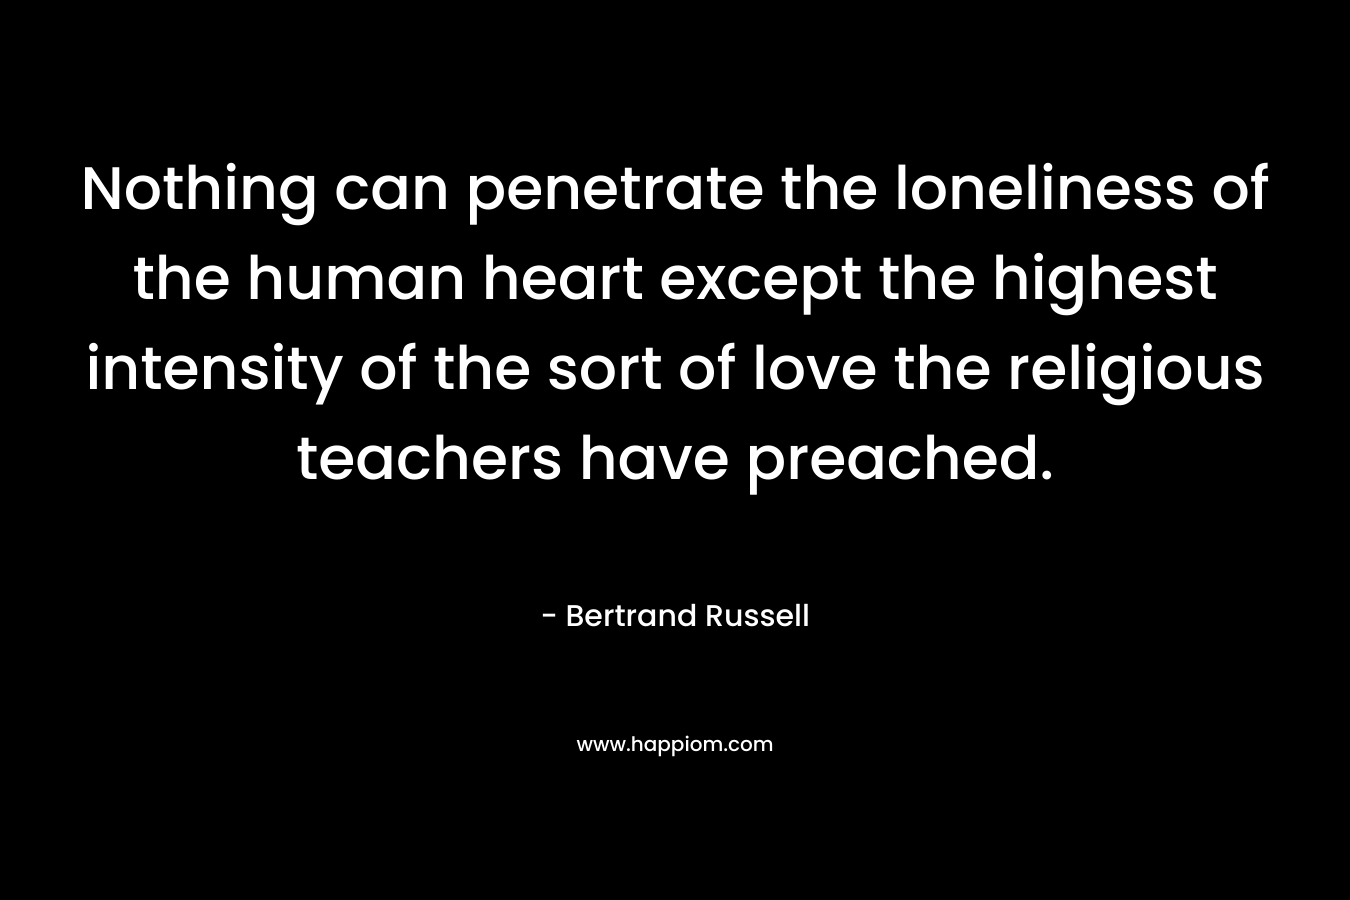 Nothing can penetrate the loneliness of the human heart except the highest intensity of the sort of love the religious teachers have preached.